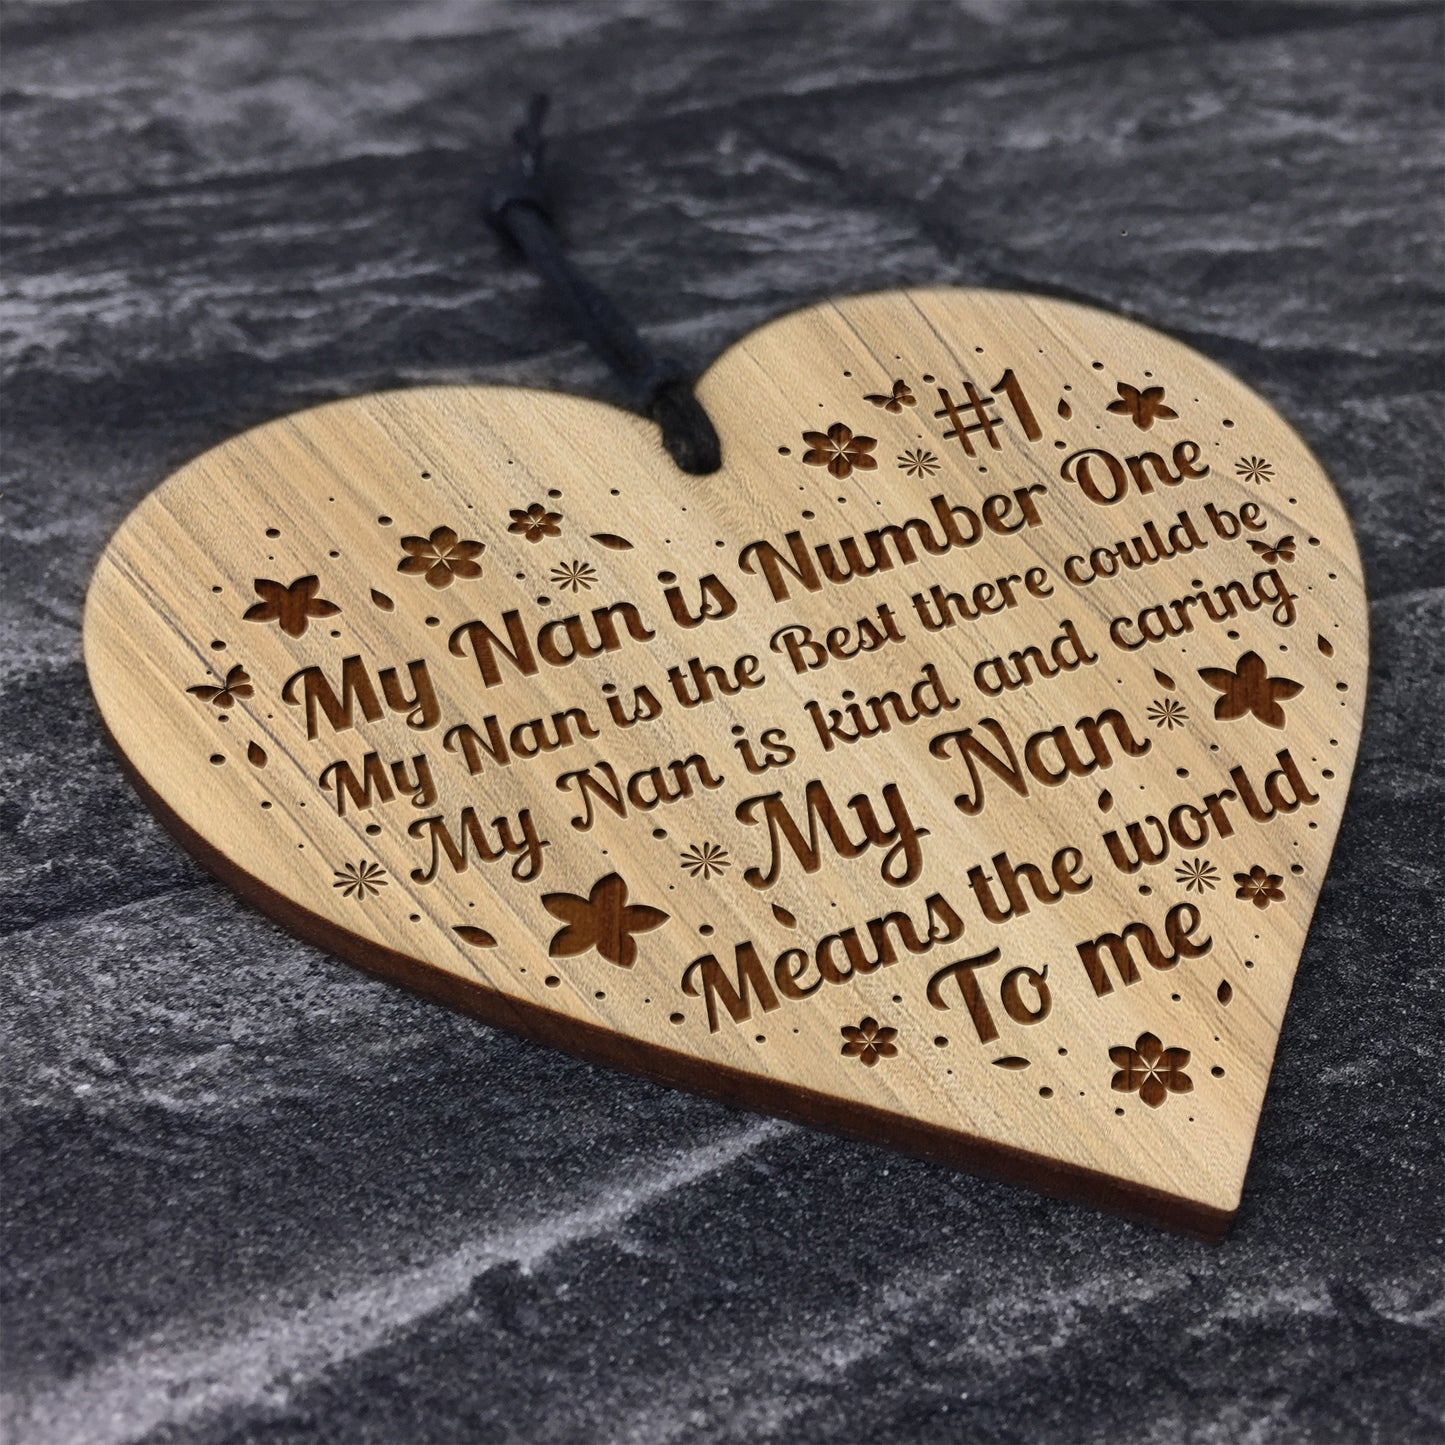 Nan Gifts For Birthday Engraved Heart Gift For Grandparents